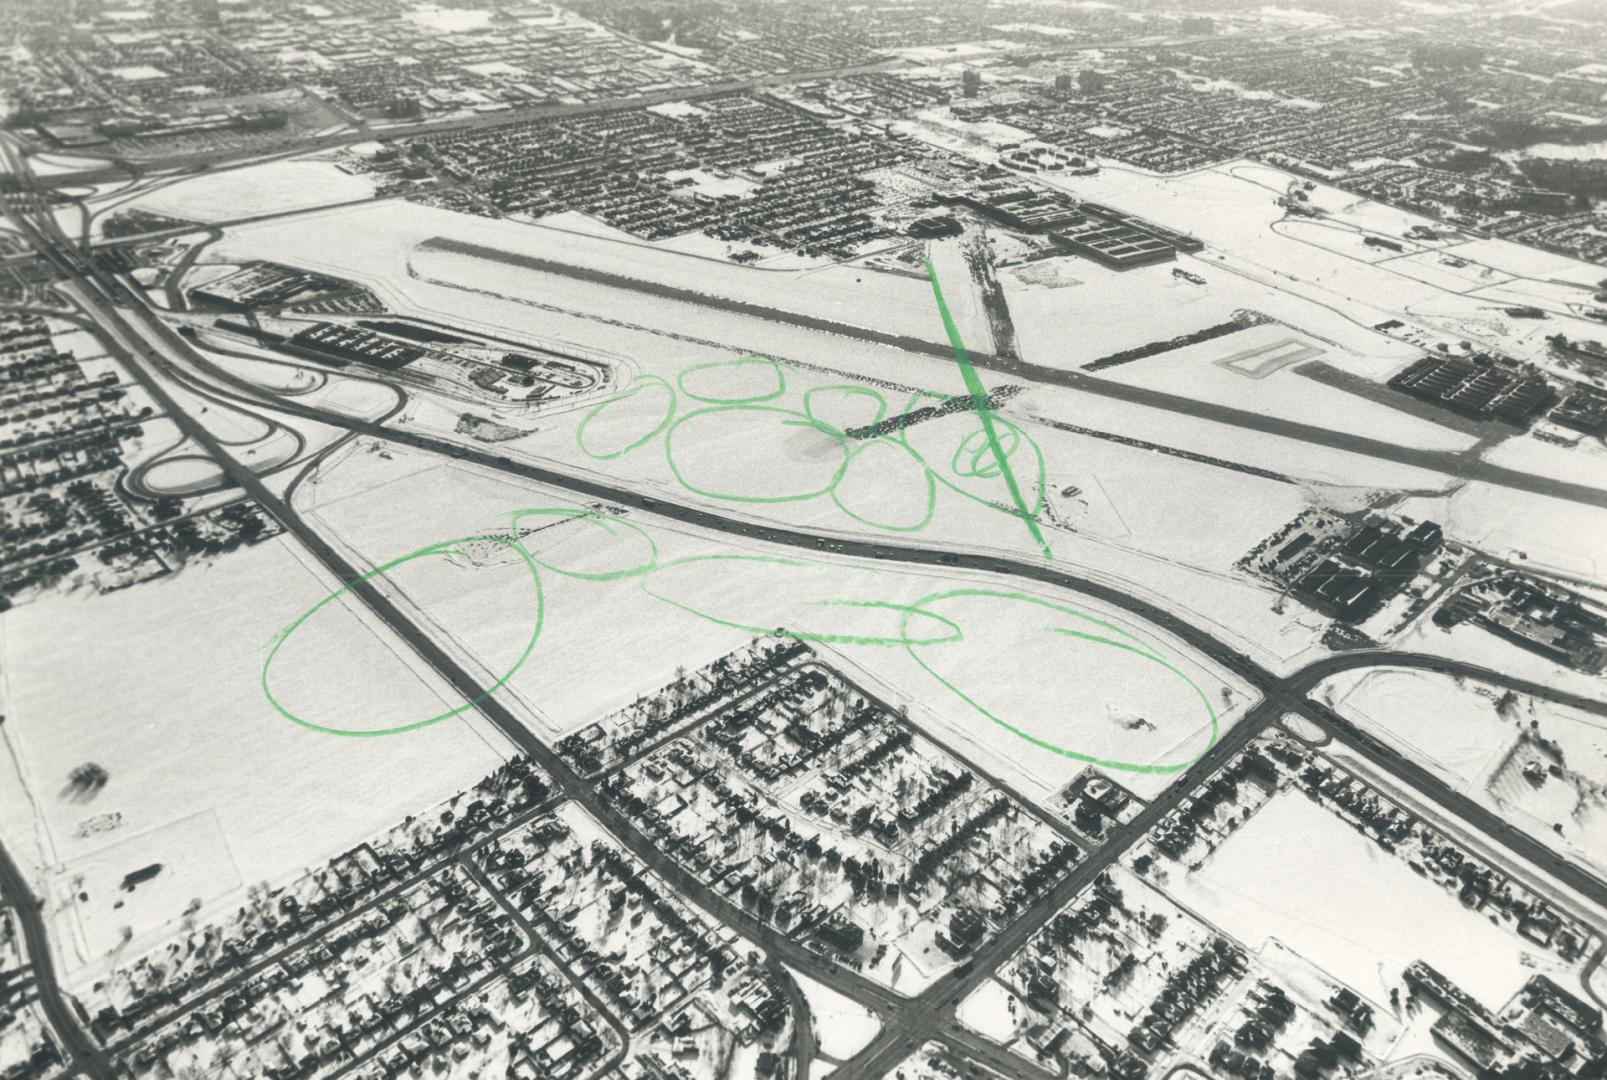 Proposed dome site. Aerials of Downsview